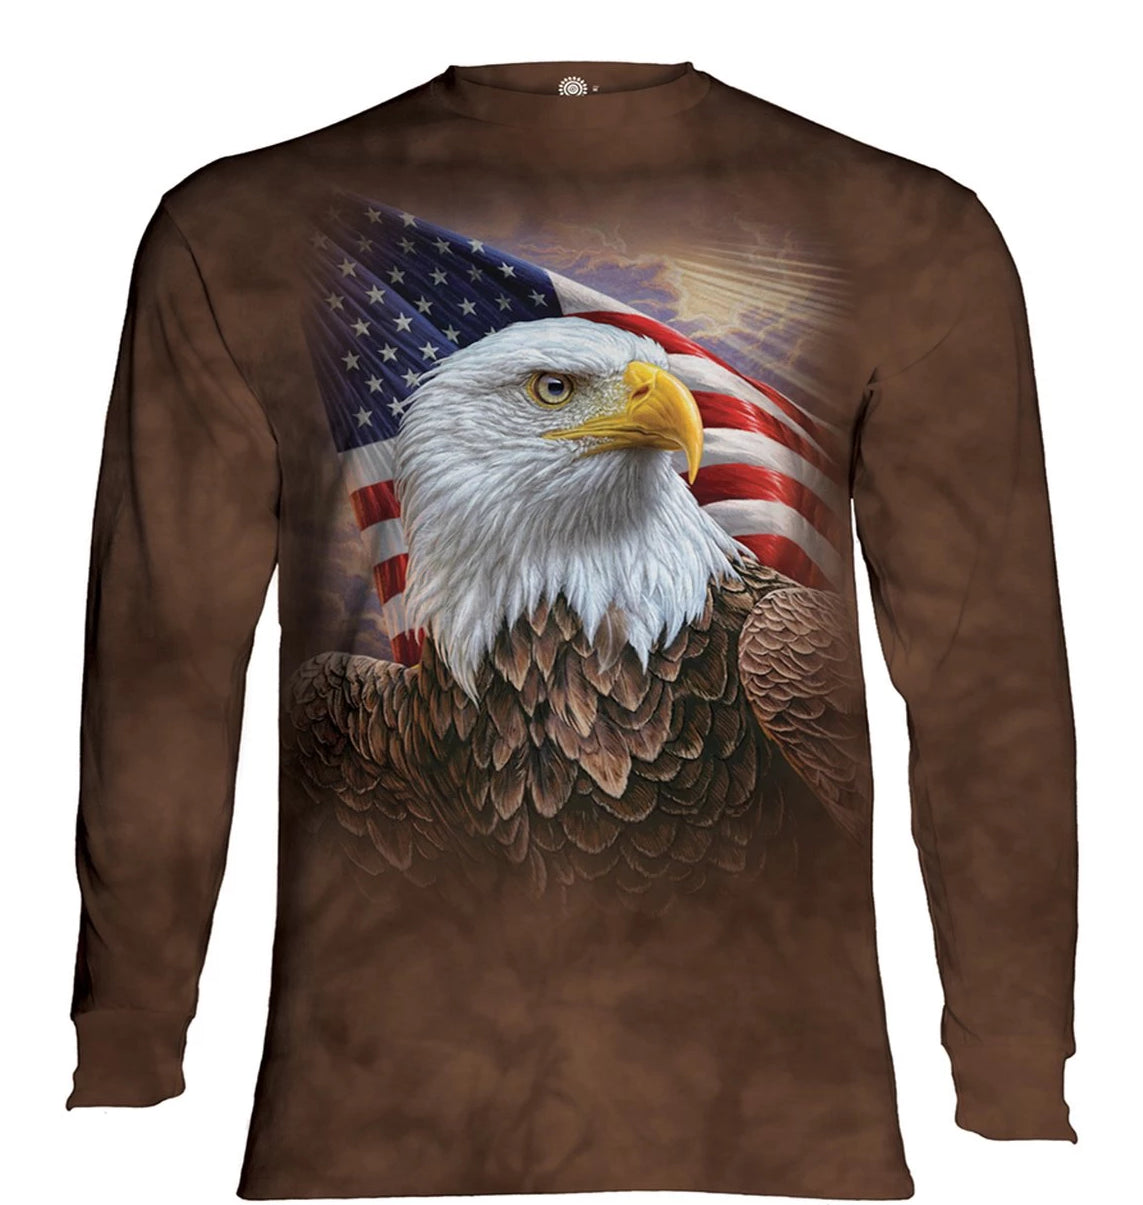 Independence Eagle - The Mountain - Long Sleeve 3D Animal T-Shirt